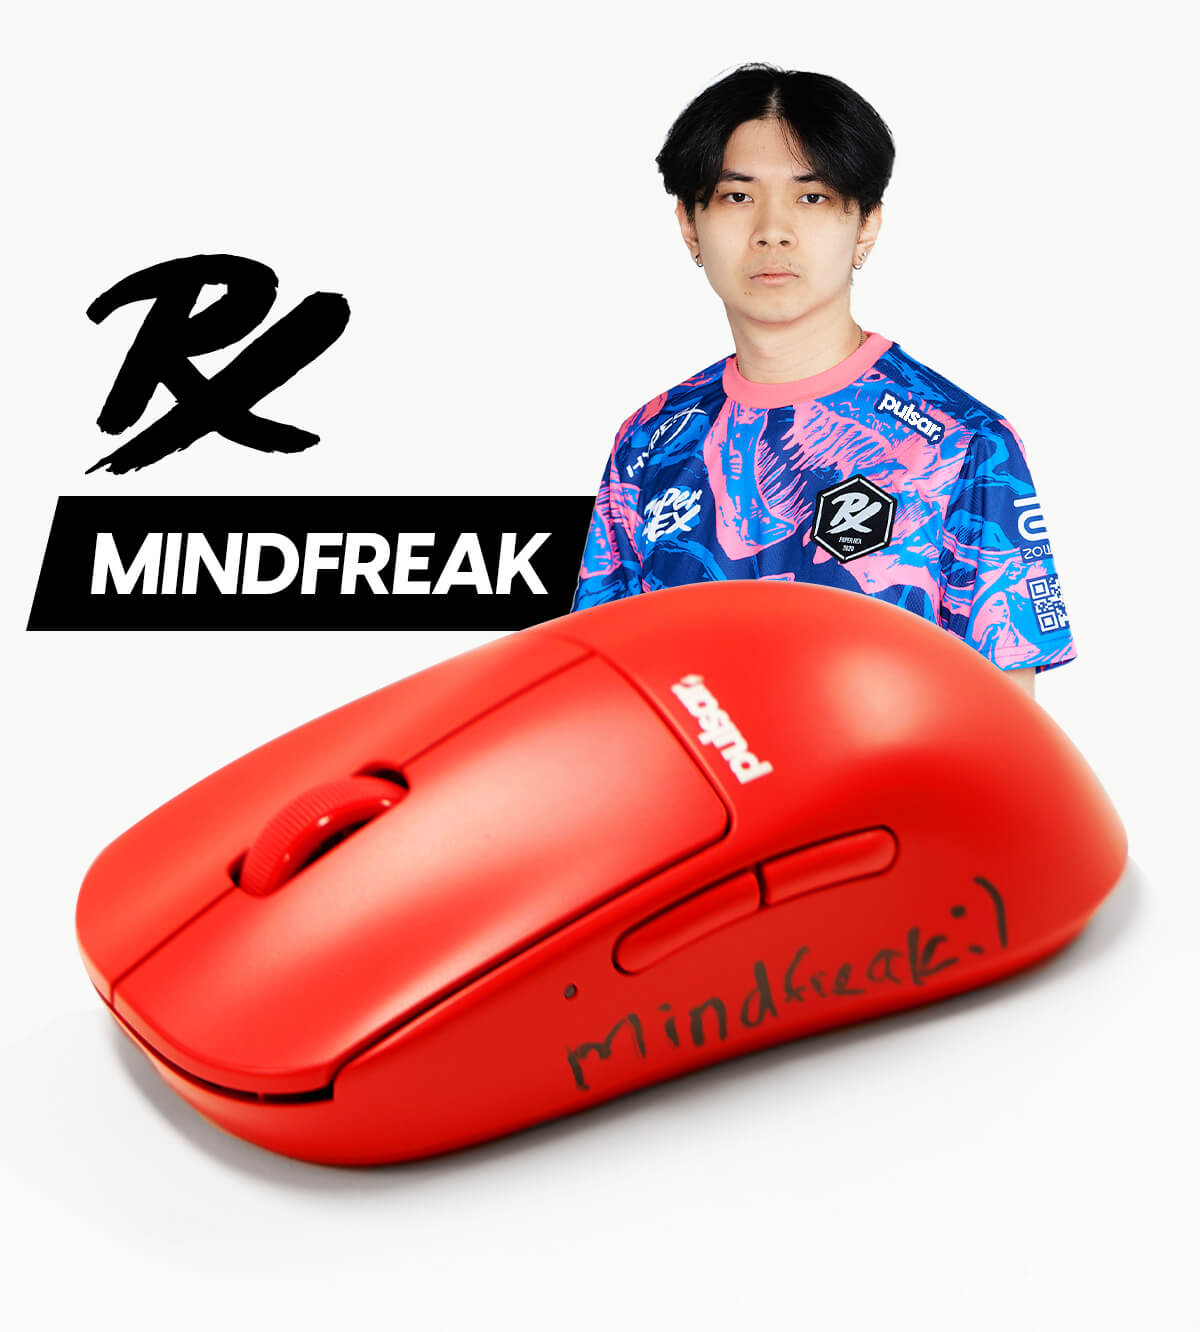 Pulsar X2H wireless gaming_mouse_autographed by Mindfreak from PRX